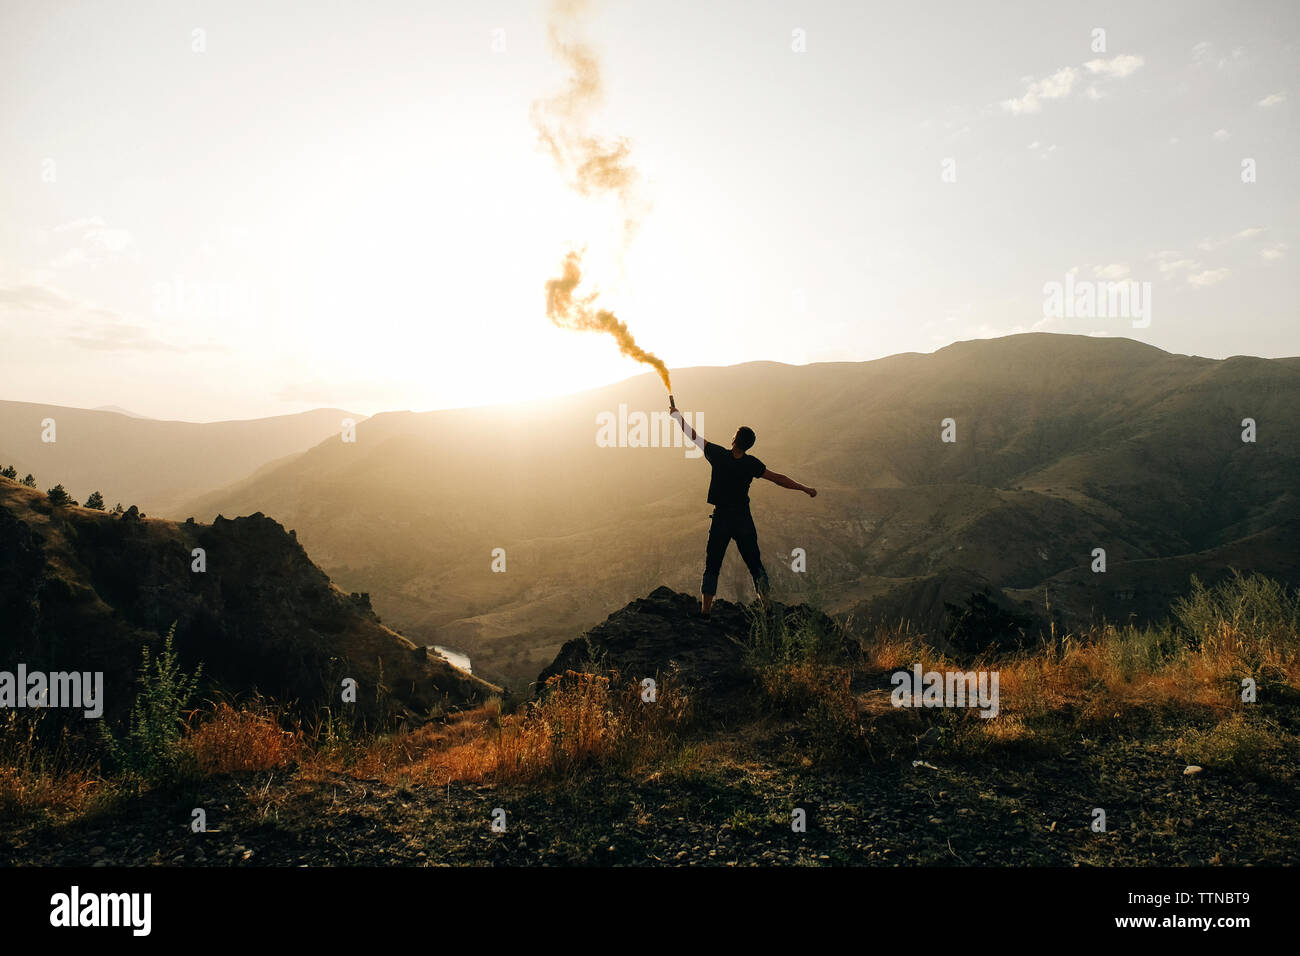 Rear view of silhouette man holding distress flare while standing on mountain against sky during sunset Stock Photo